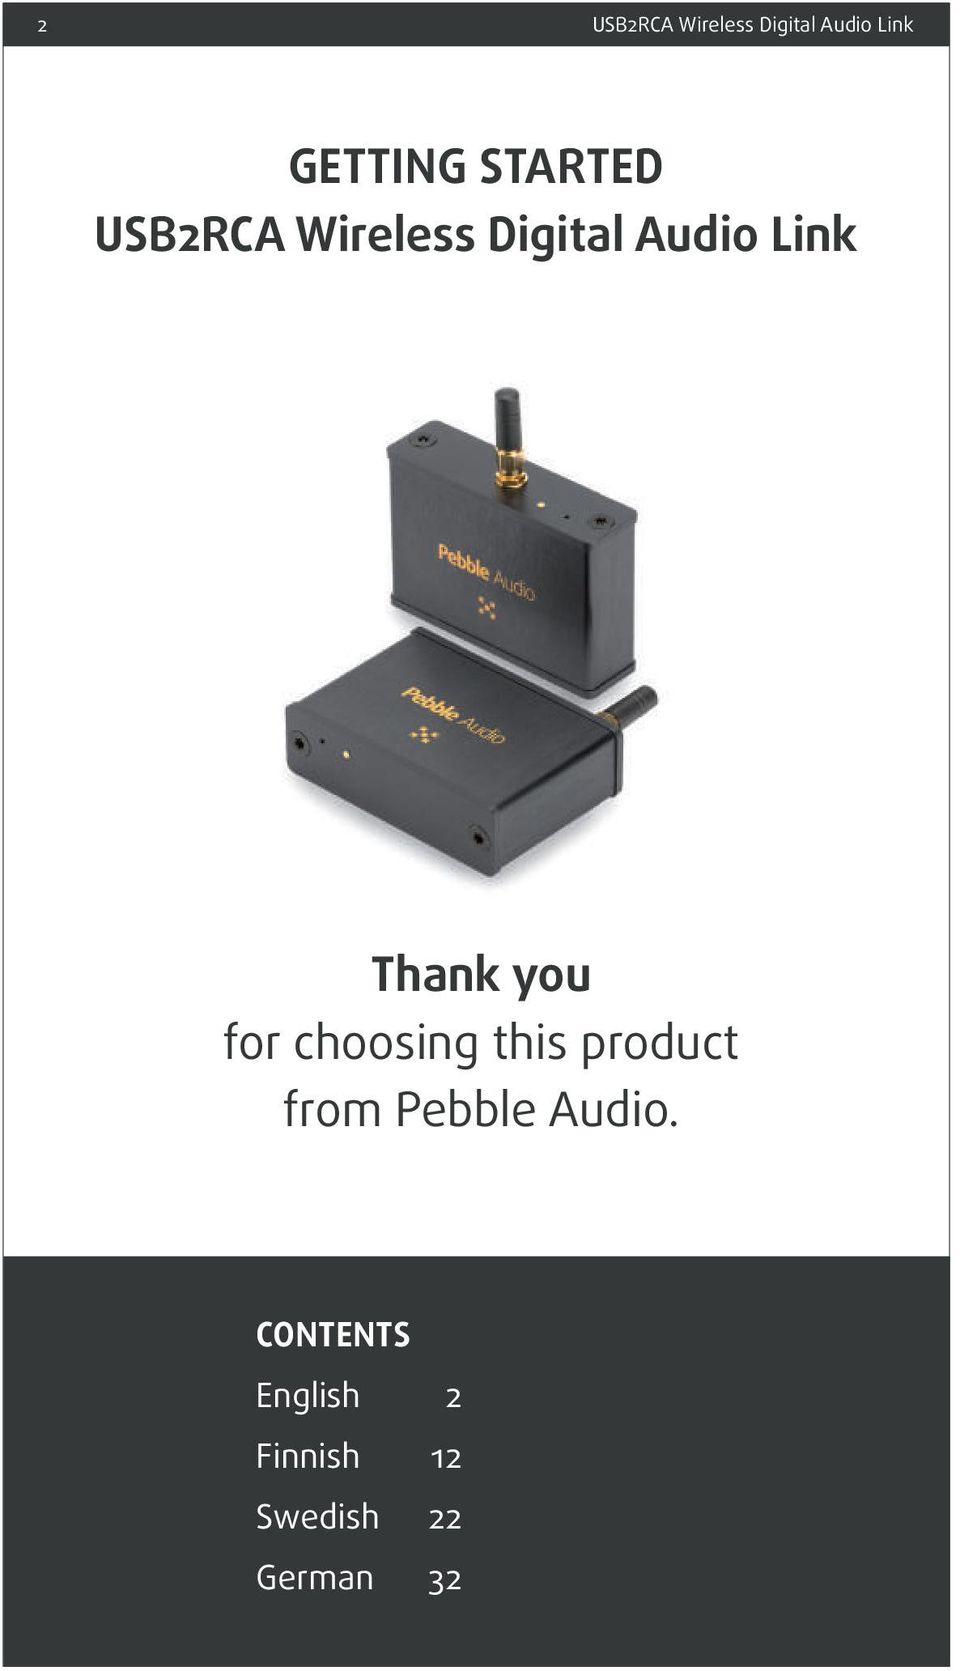 Thank you for choosing this product from Pebble